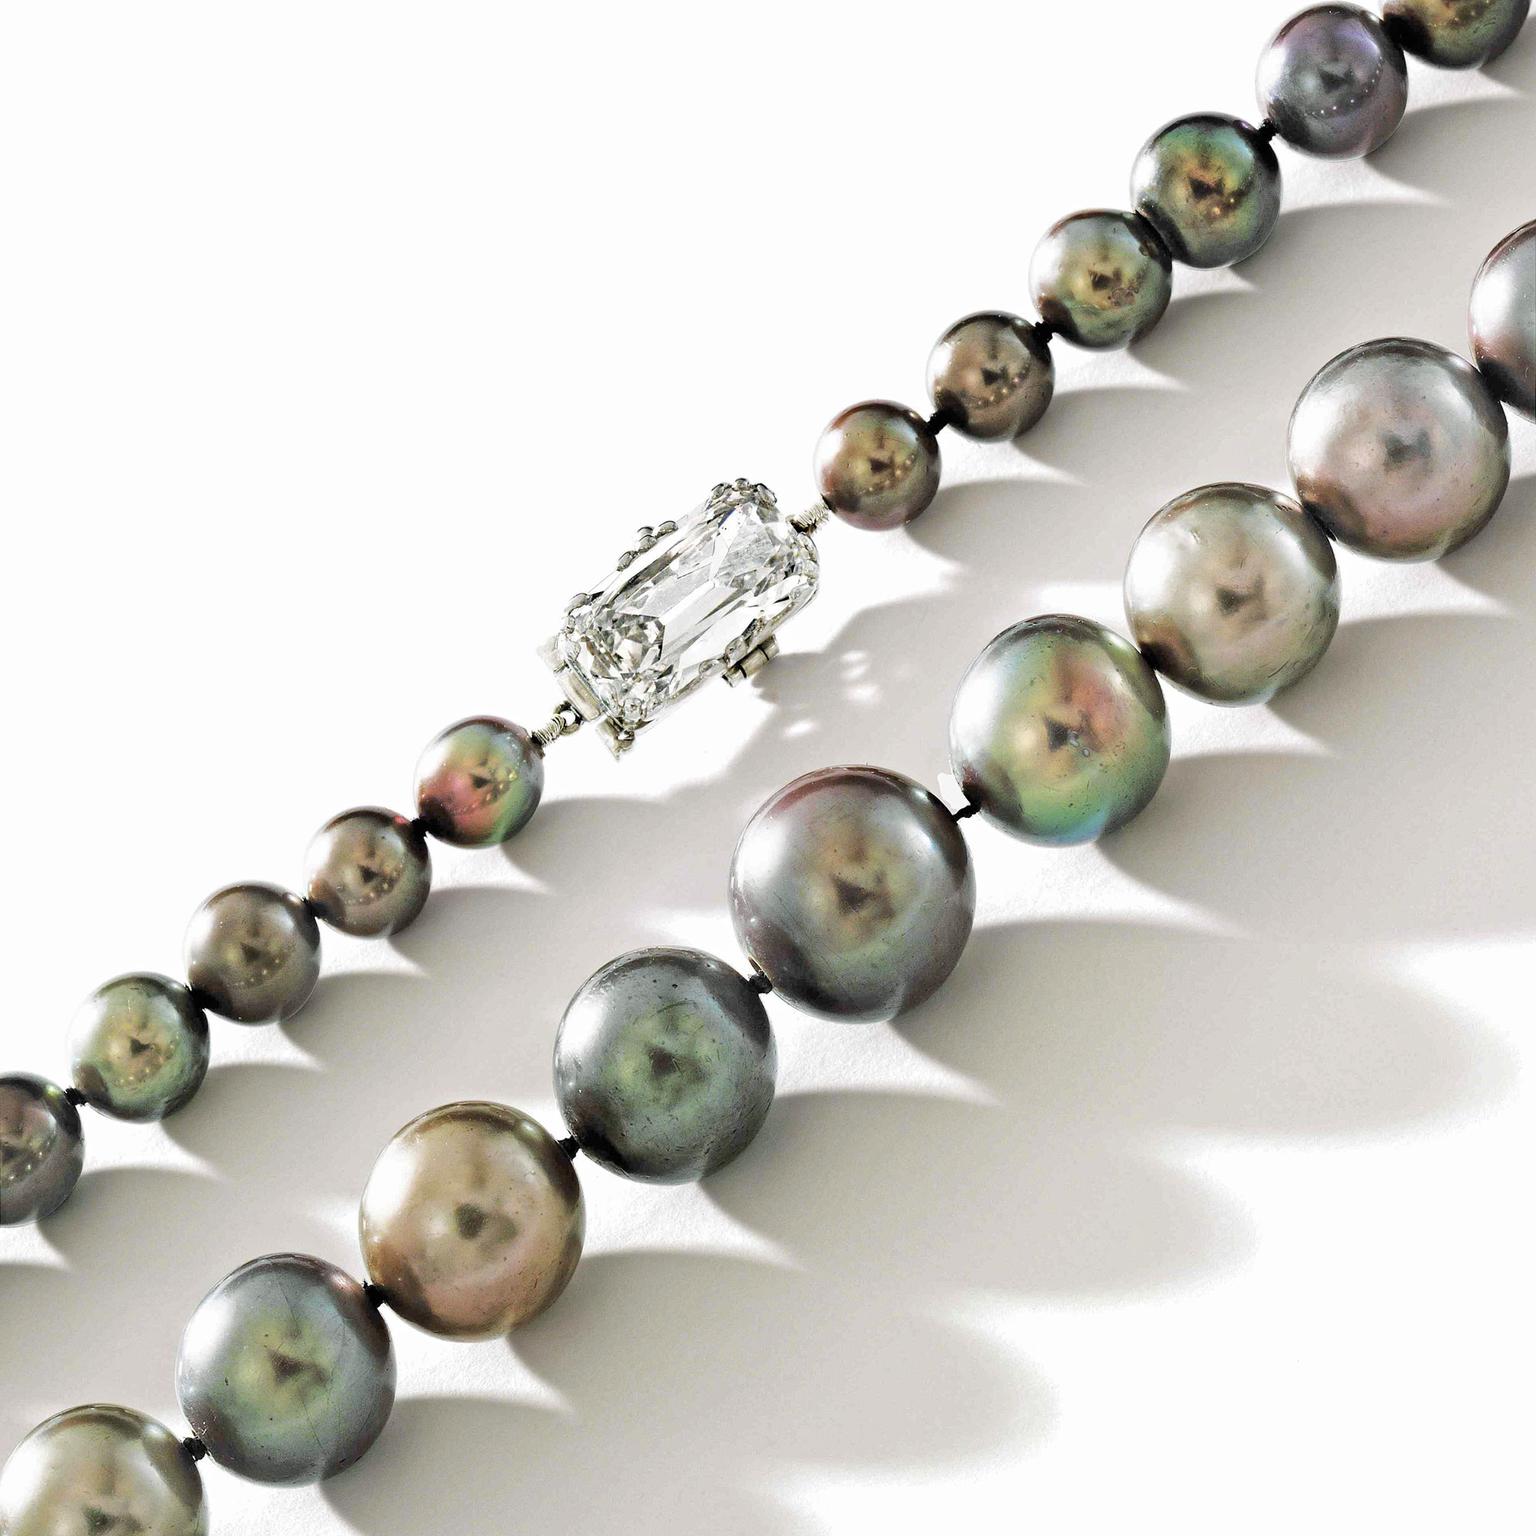 Cowdray pearls up for auction at Sotheby's Hong Kong